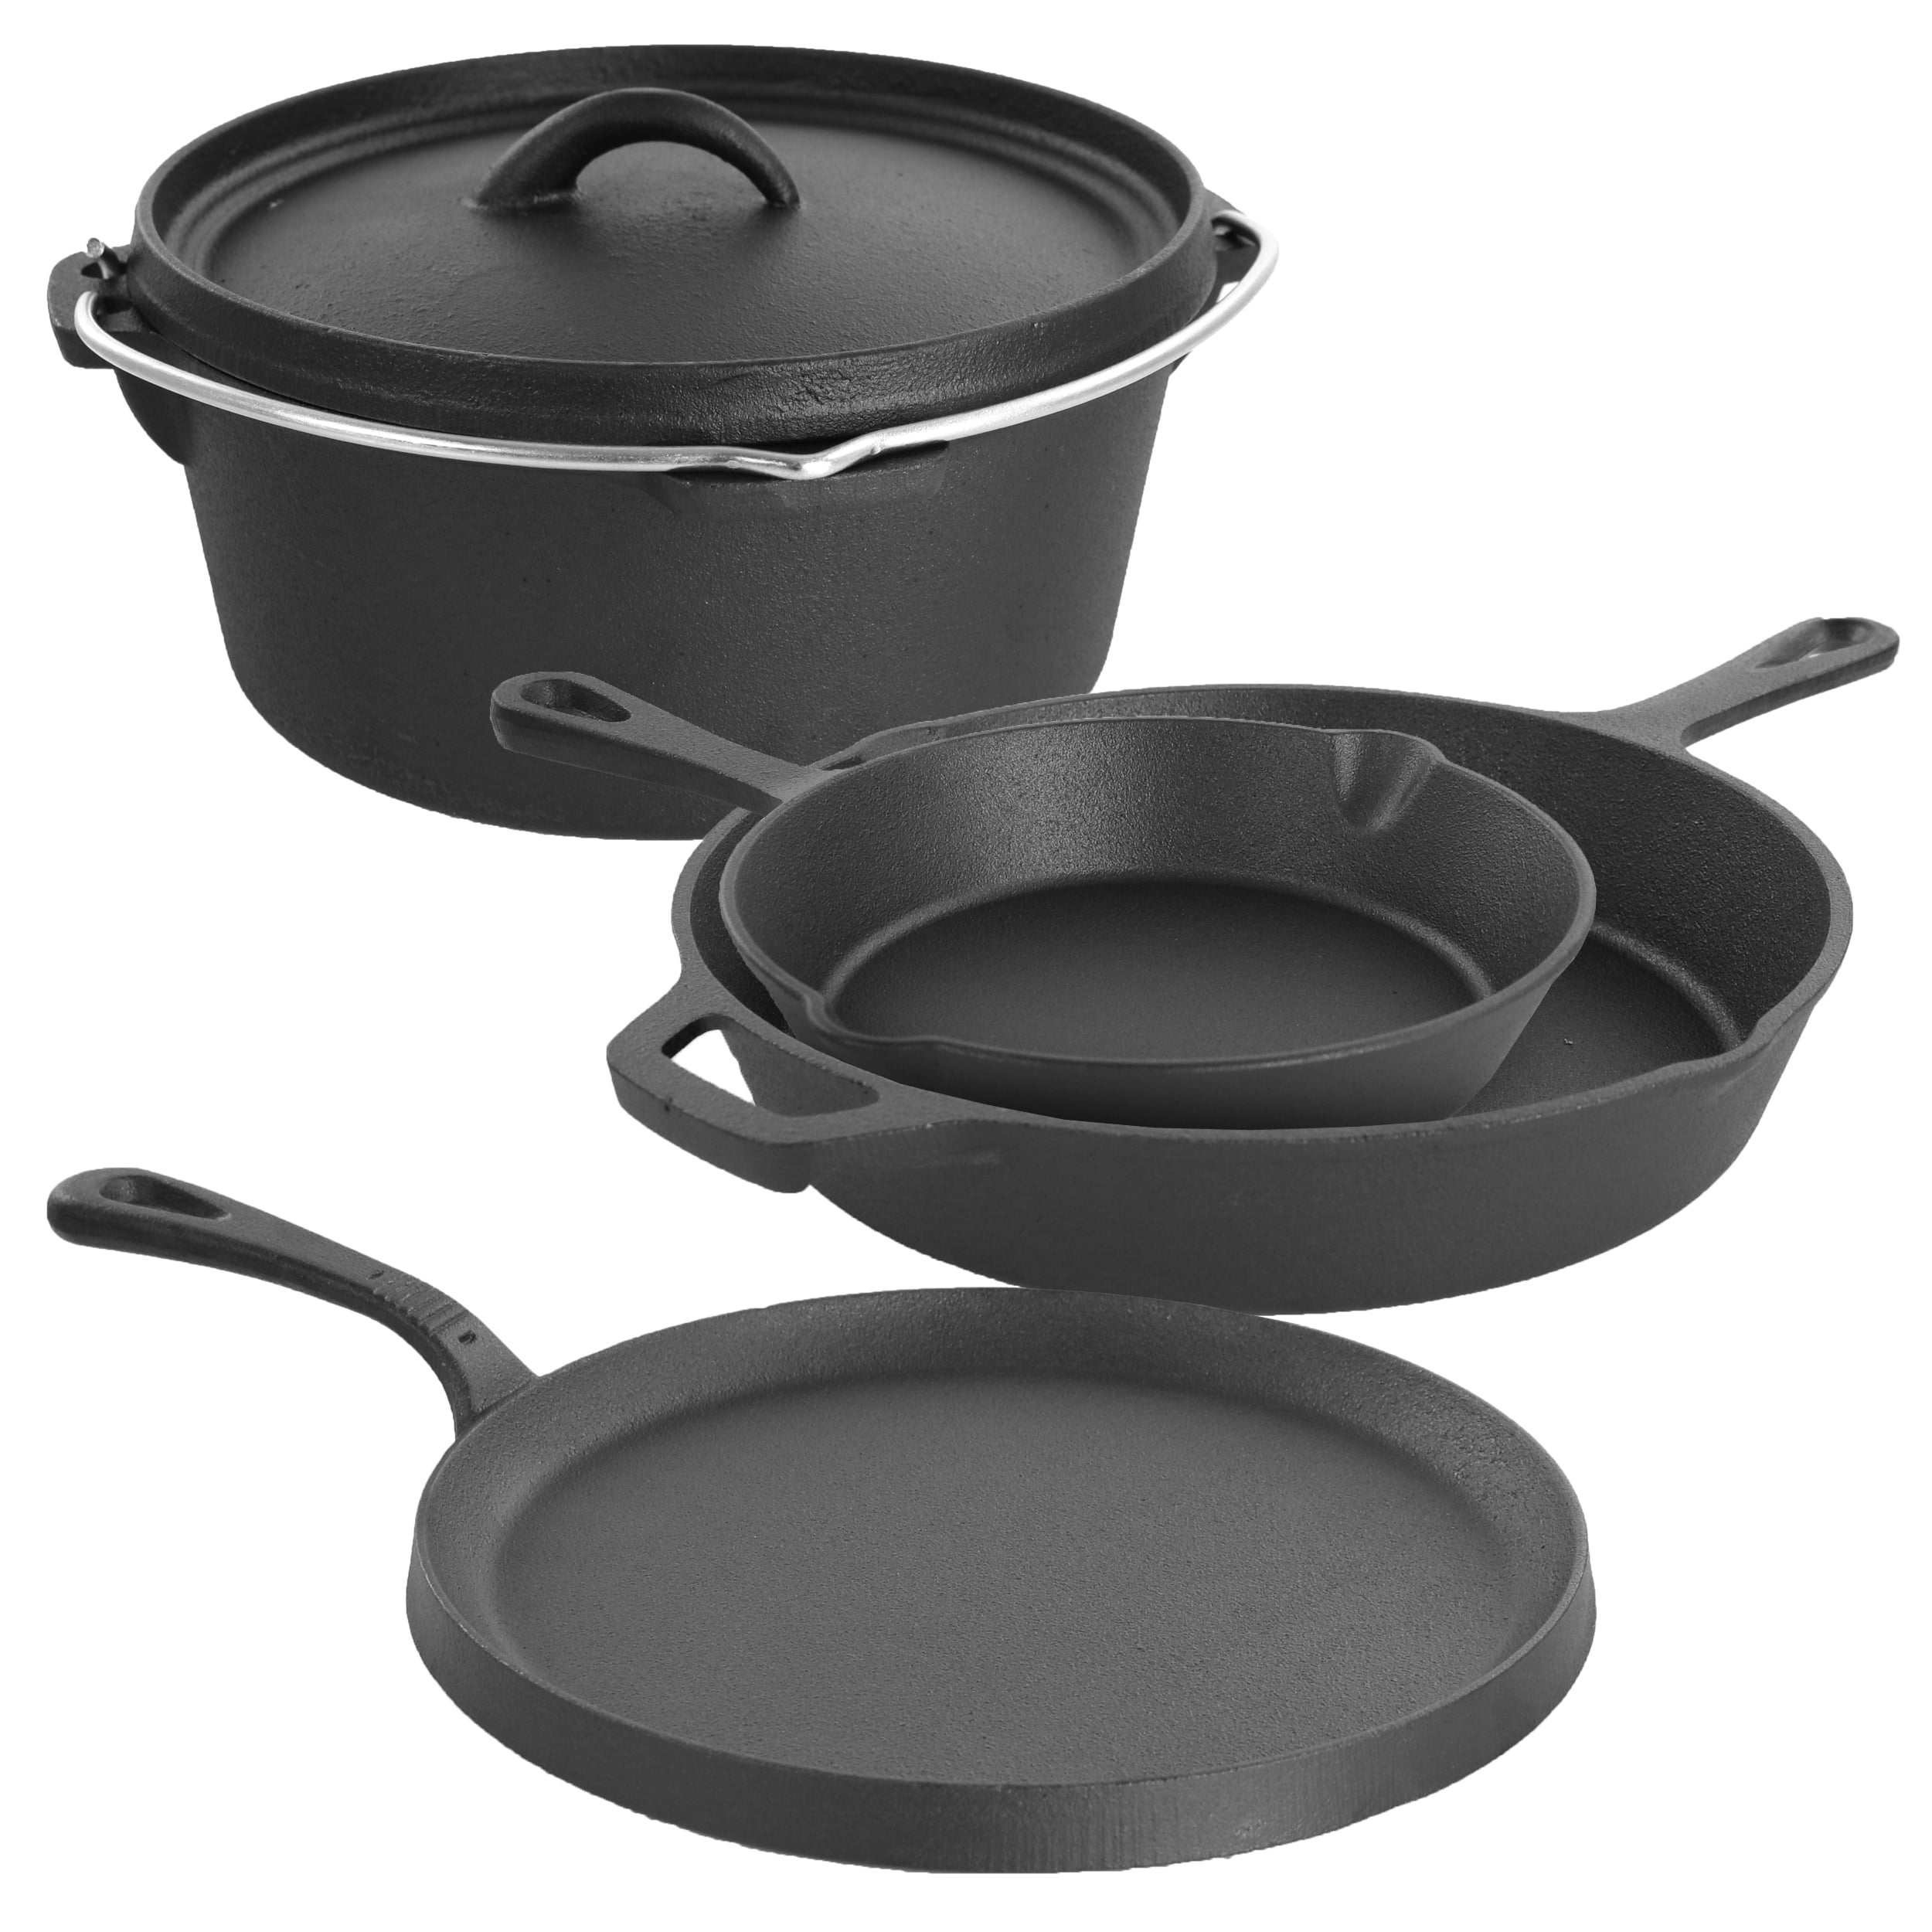 5 Inch Cast Iron Frying Pan Skillet, 2022, NEW, FREE SHIPPING